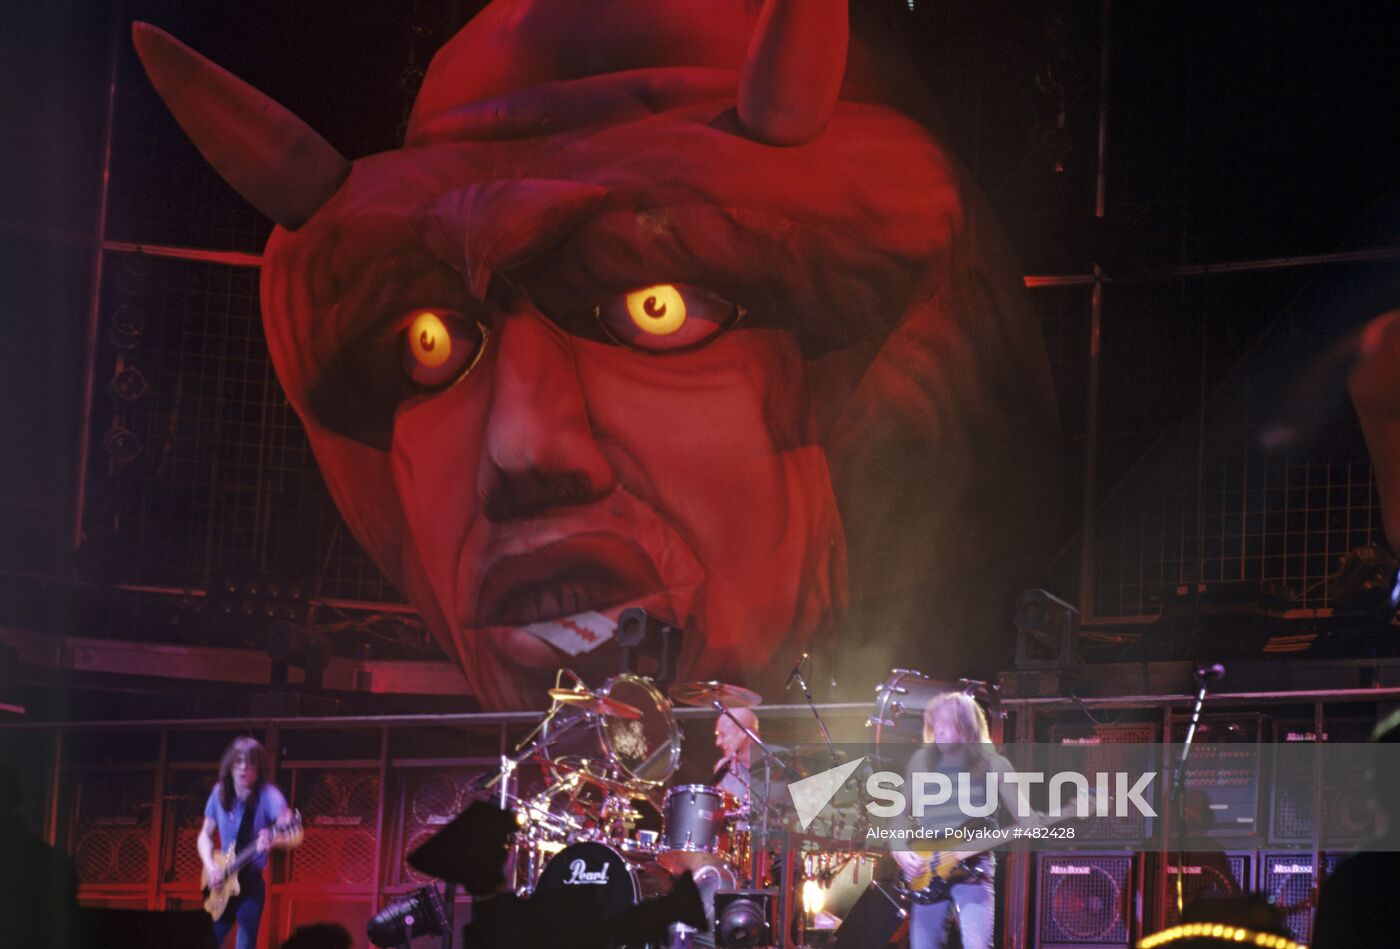 AC/DC performing at Monsters of Rock music festival